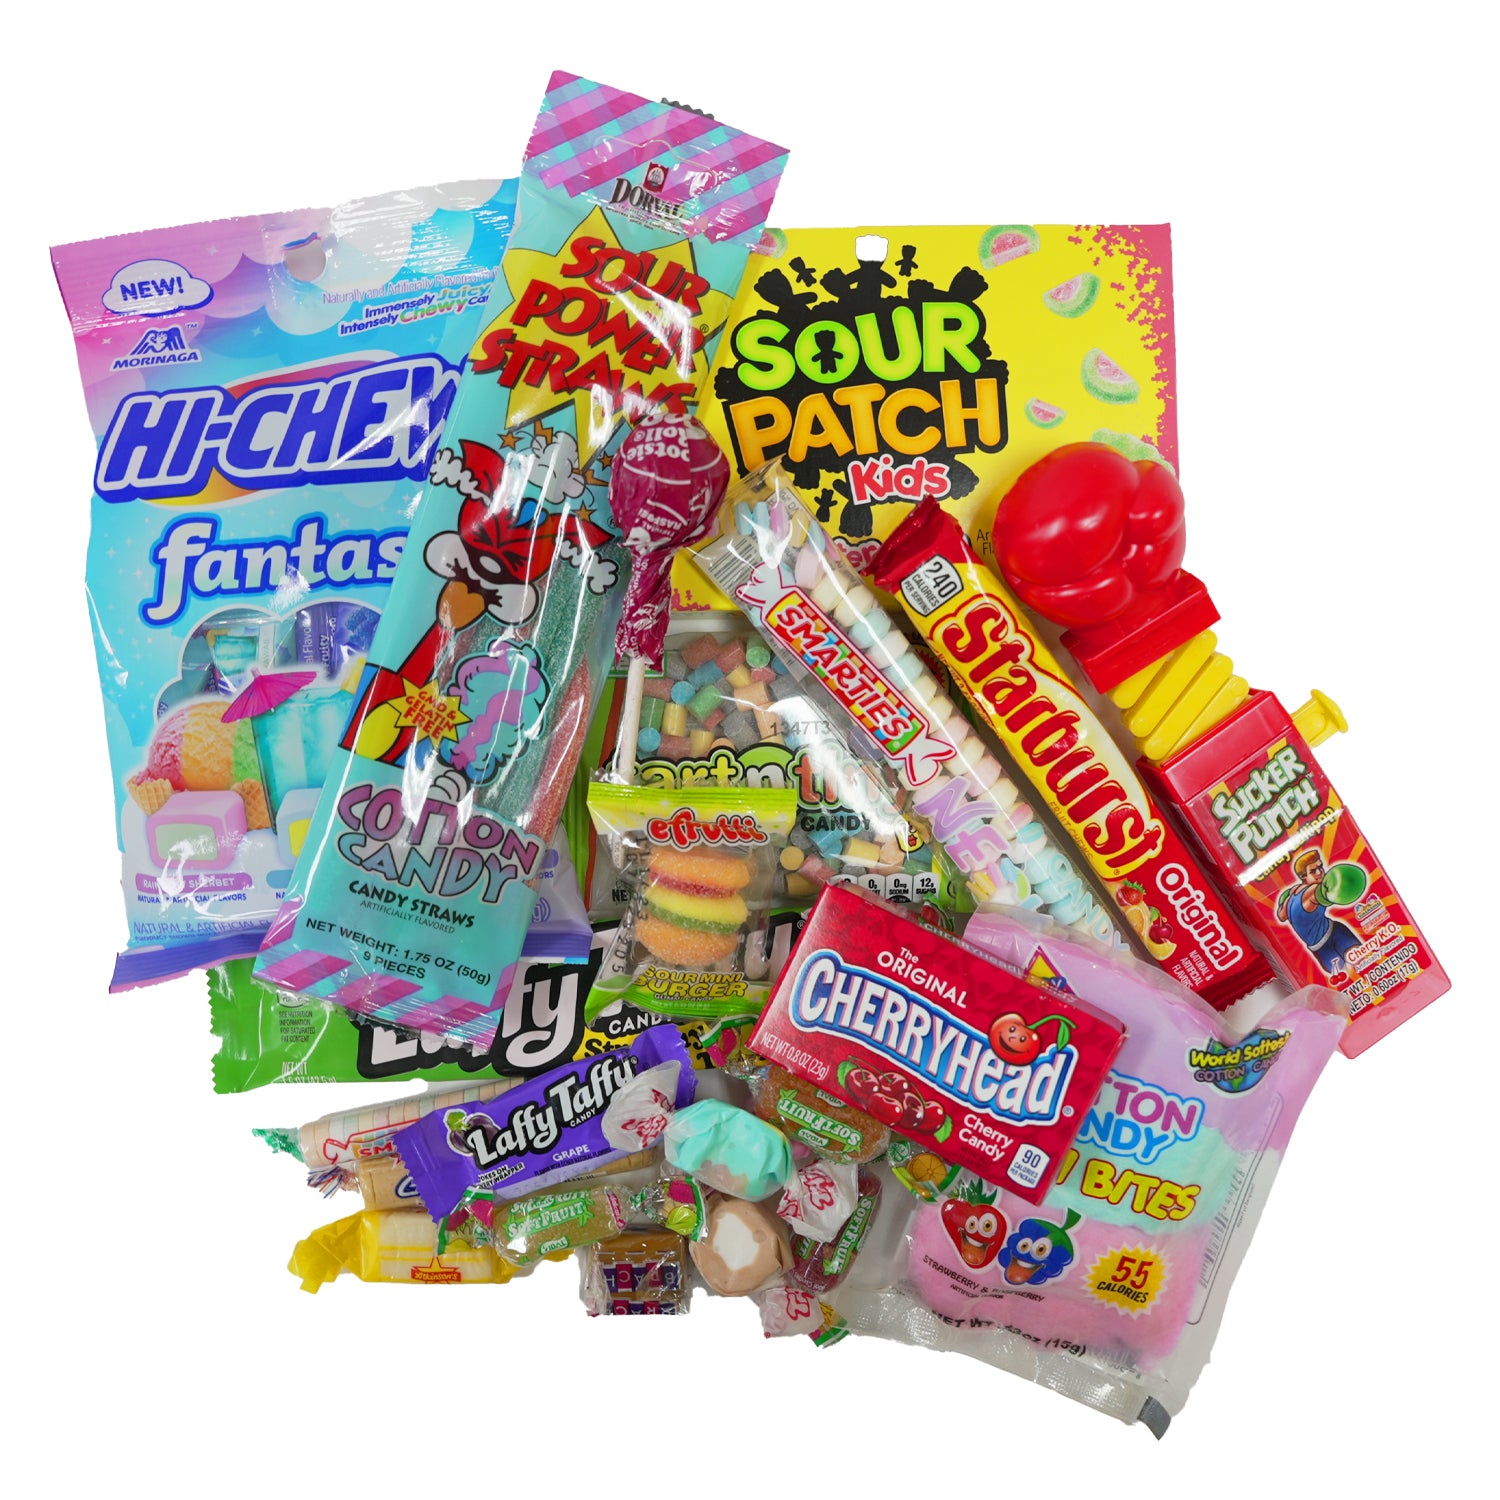 All City Candy Ice Pack AND/OR Foam Cooler - We Recommend For Orders Over  75 Degrees That Include Chocolate, Caramel and Marshmallows